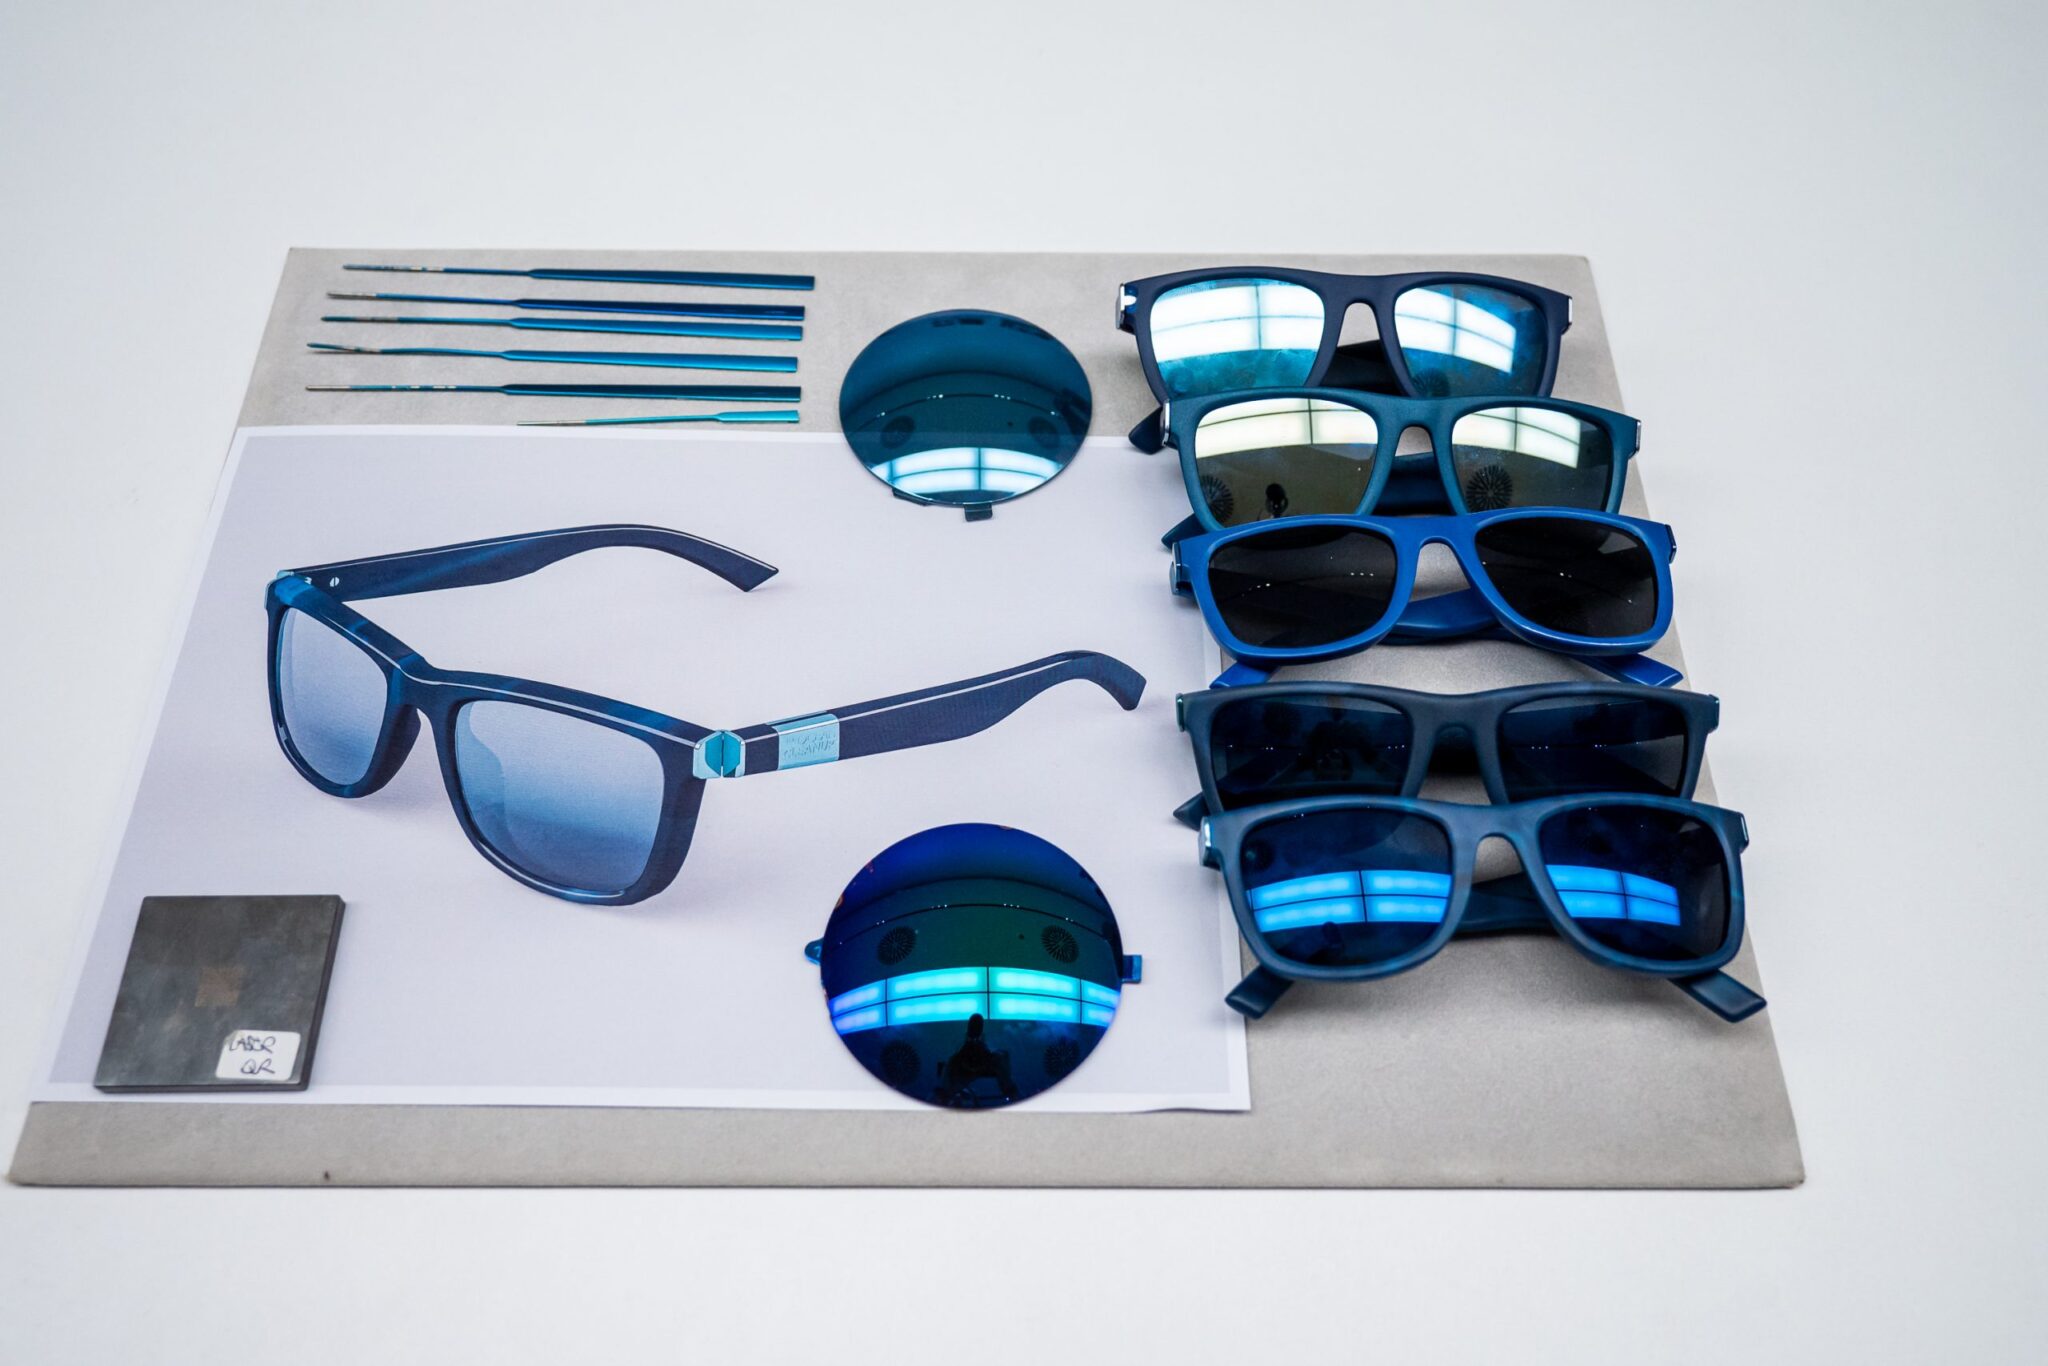 Sunglasses in various shades of blue are displayed. They are made of recycled marine plastic.